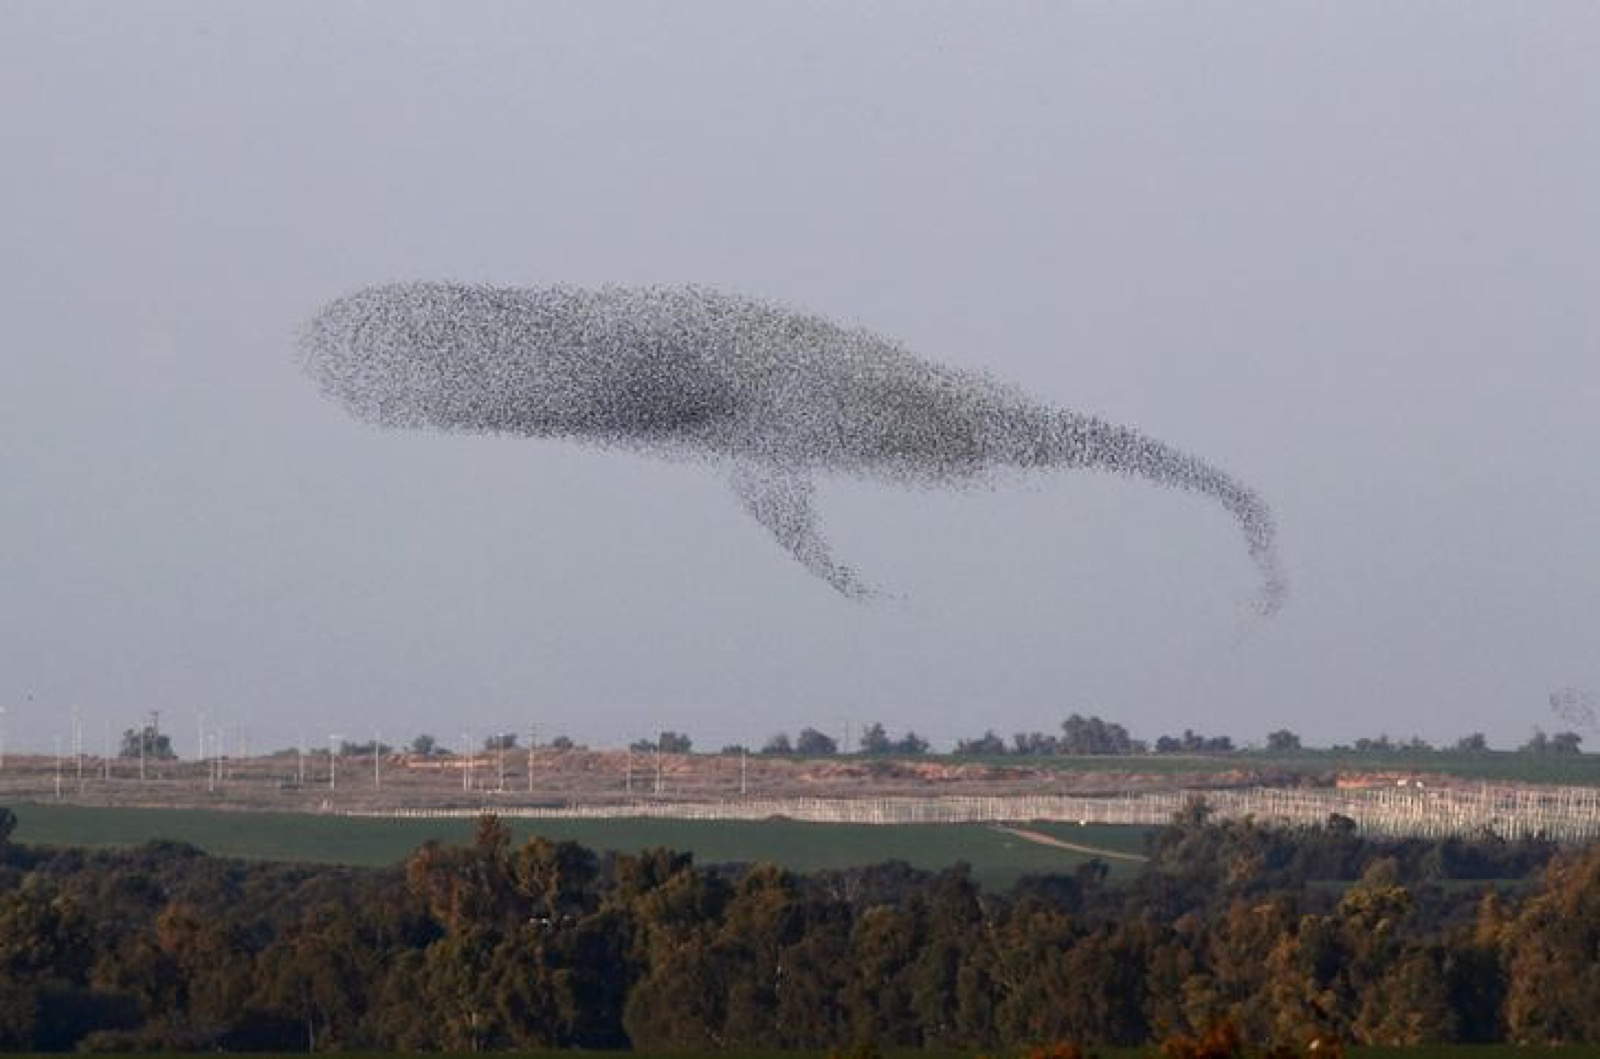  Amir Cohen/Reuters. caption: A murmuration of migrating starlings in southern Israel.